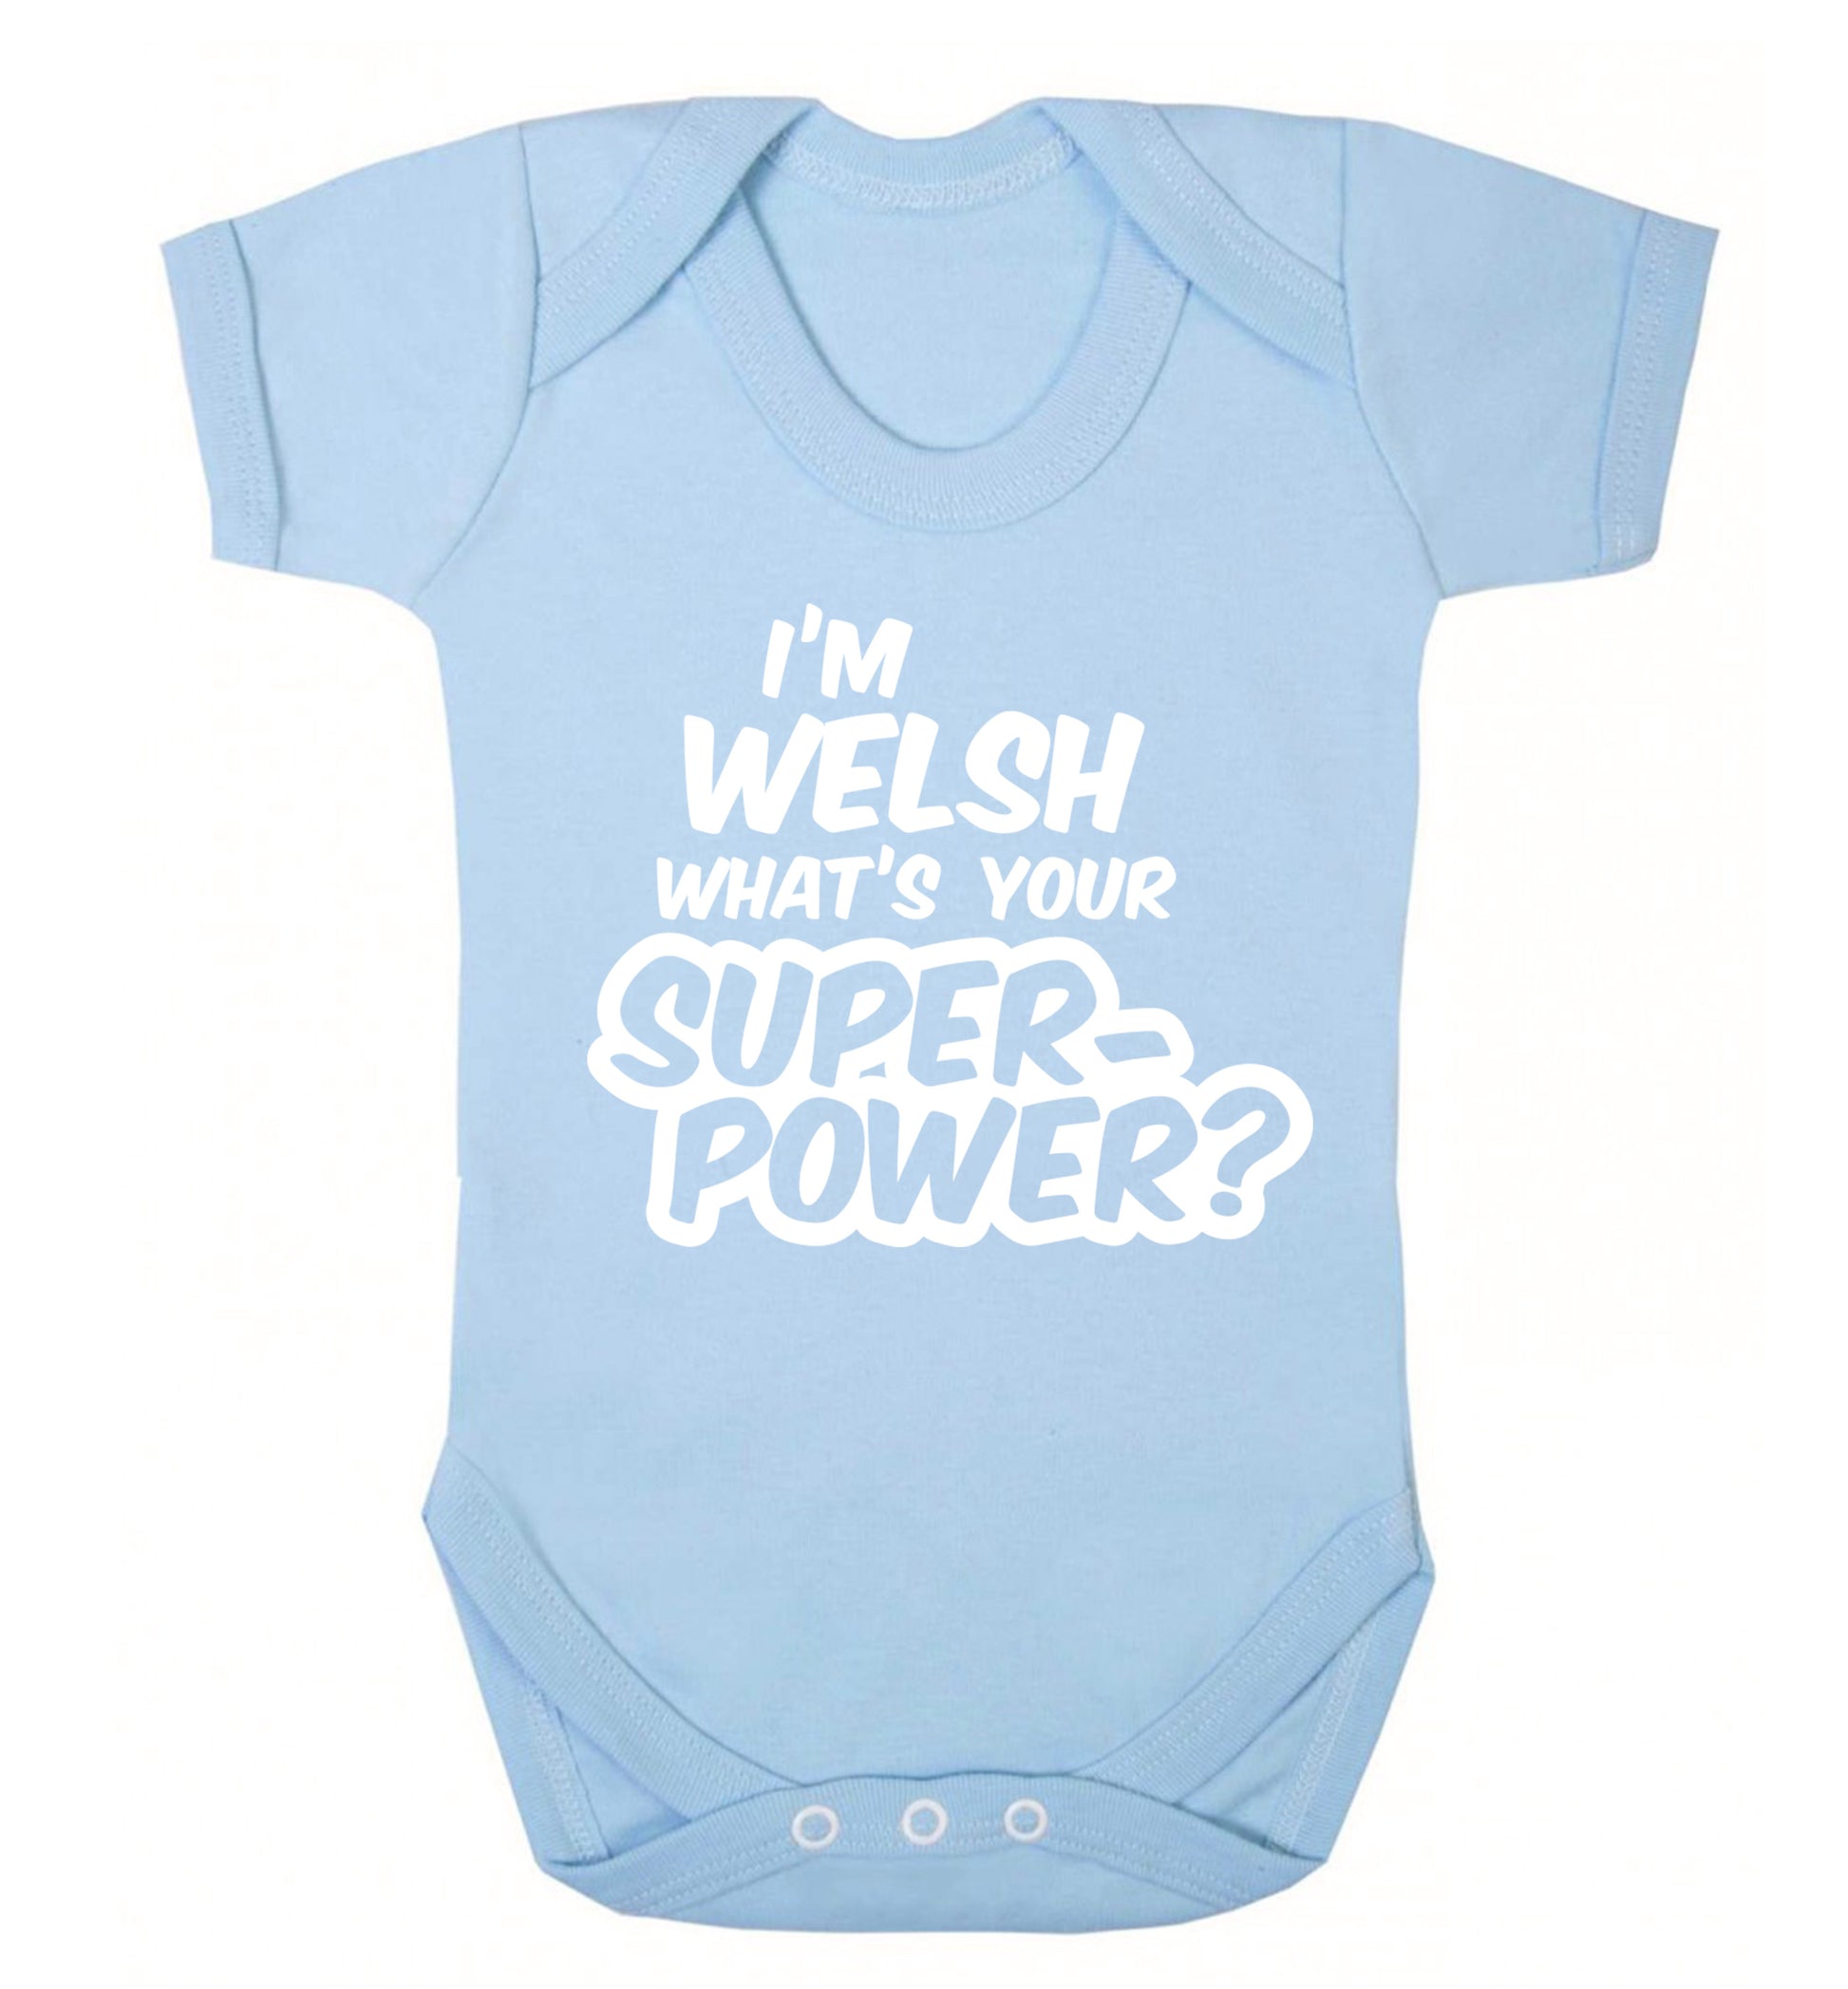 I'm Welsh what's your superpower? Baby Vest pale blue 18-24 months